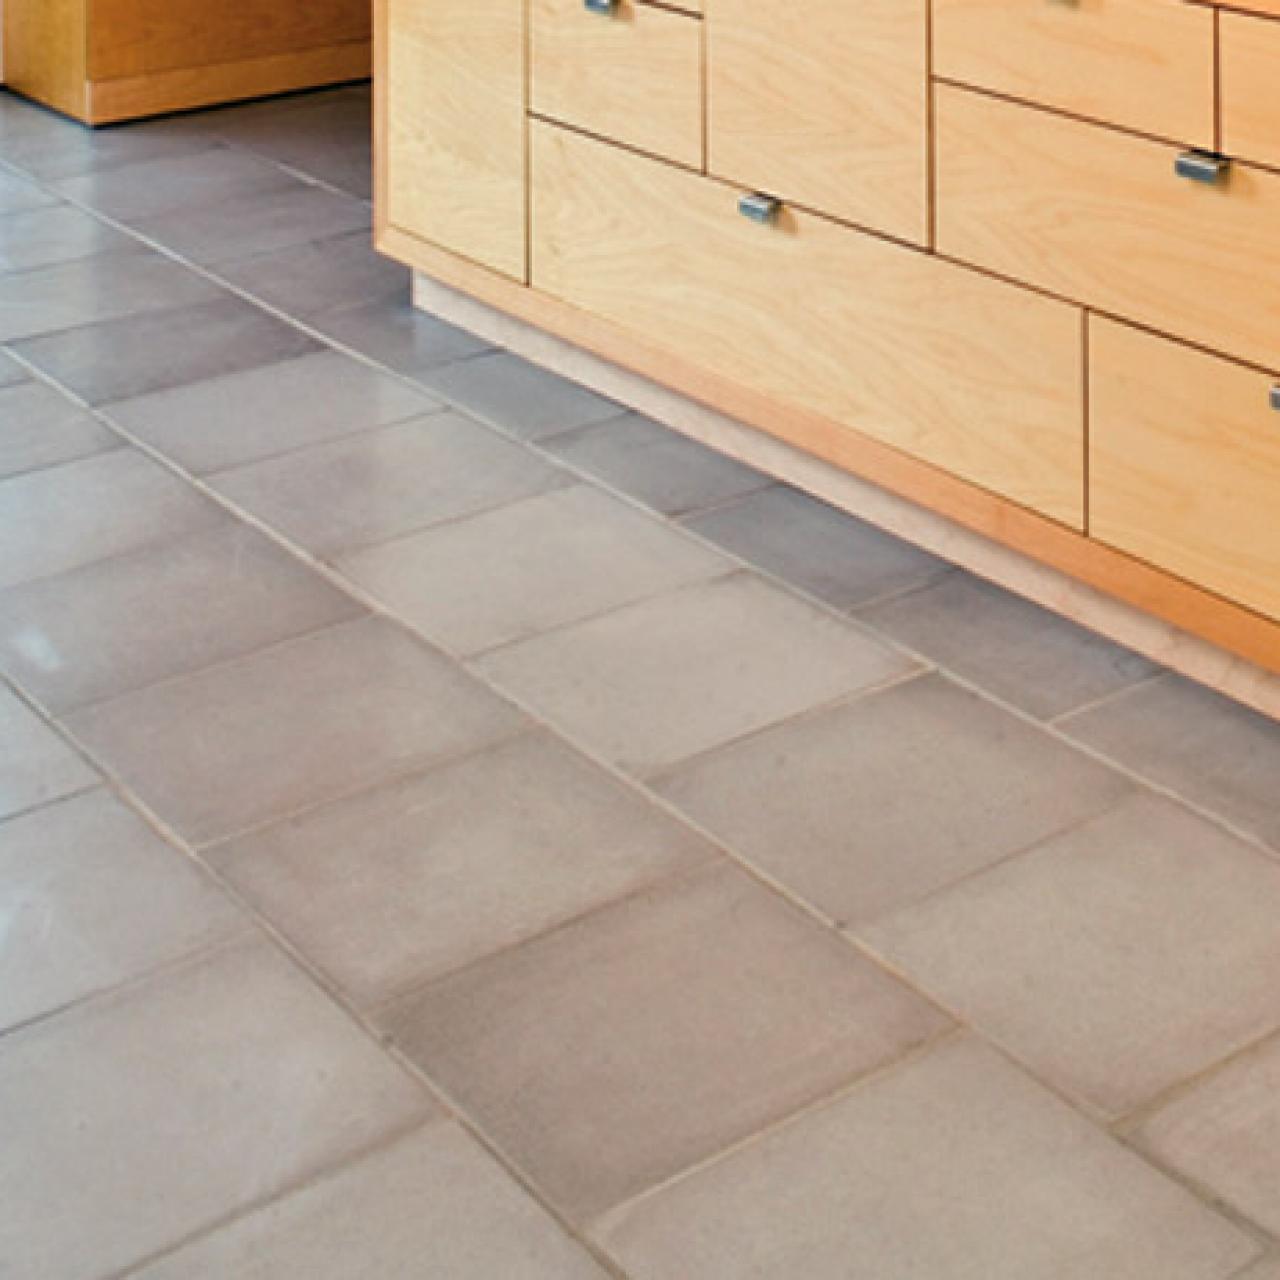 What kind of materials is best for kitchen floor mat? And how to